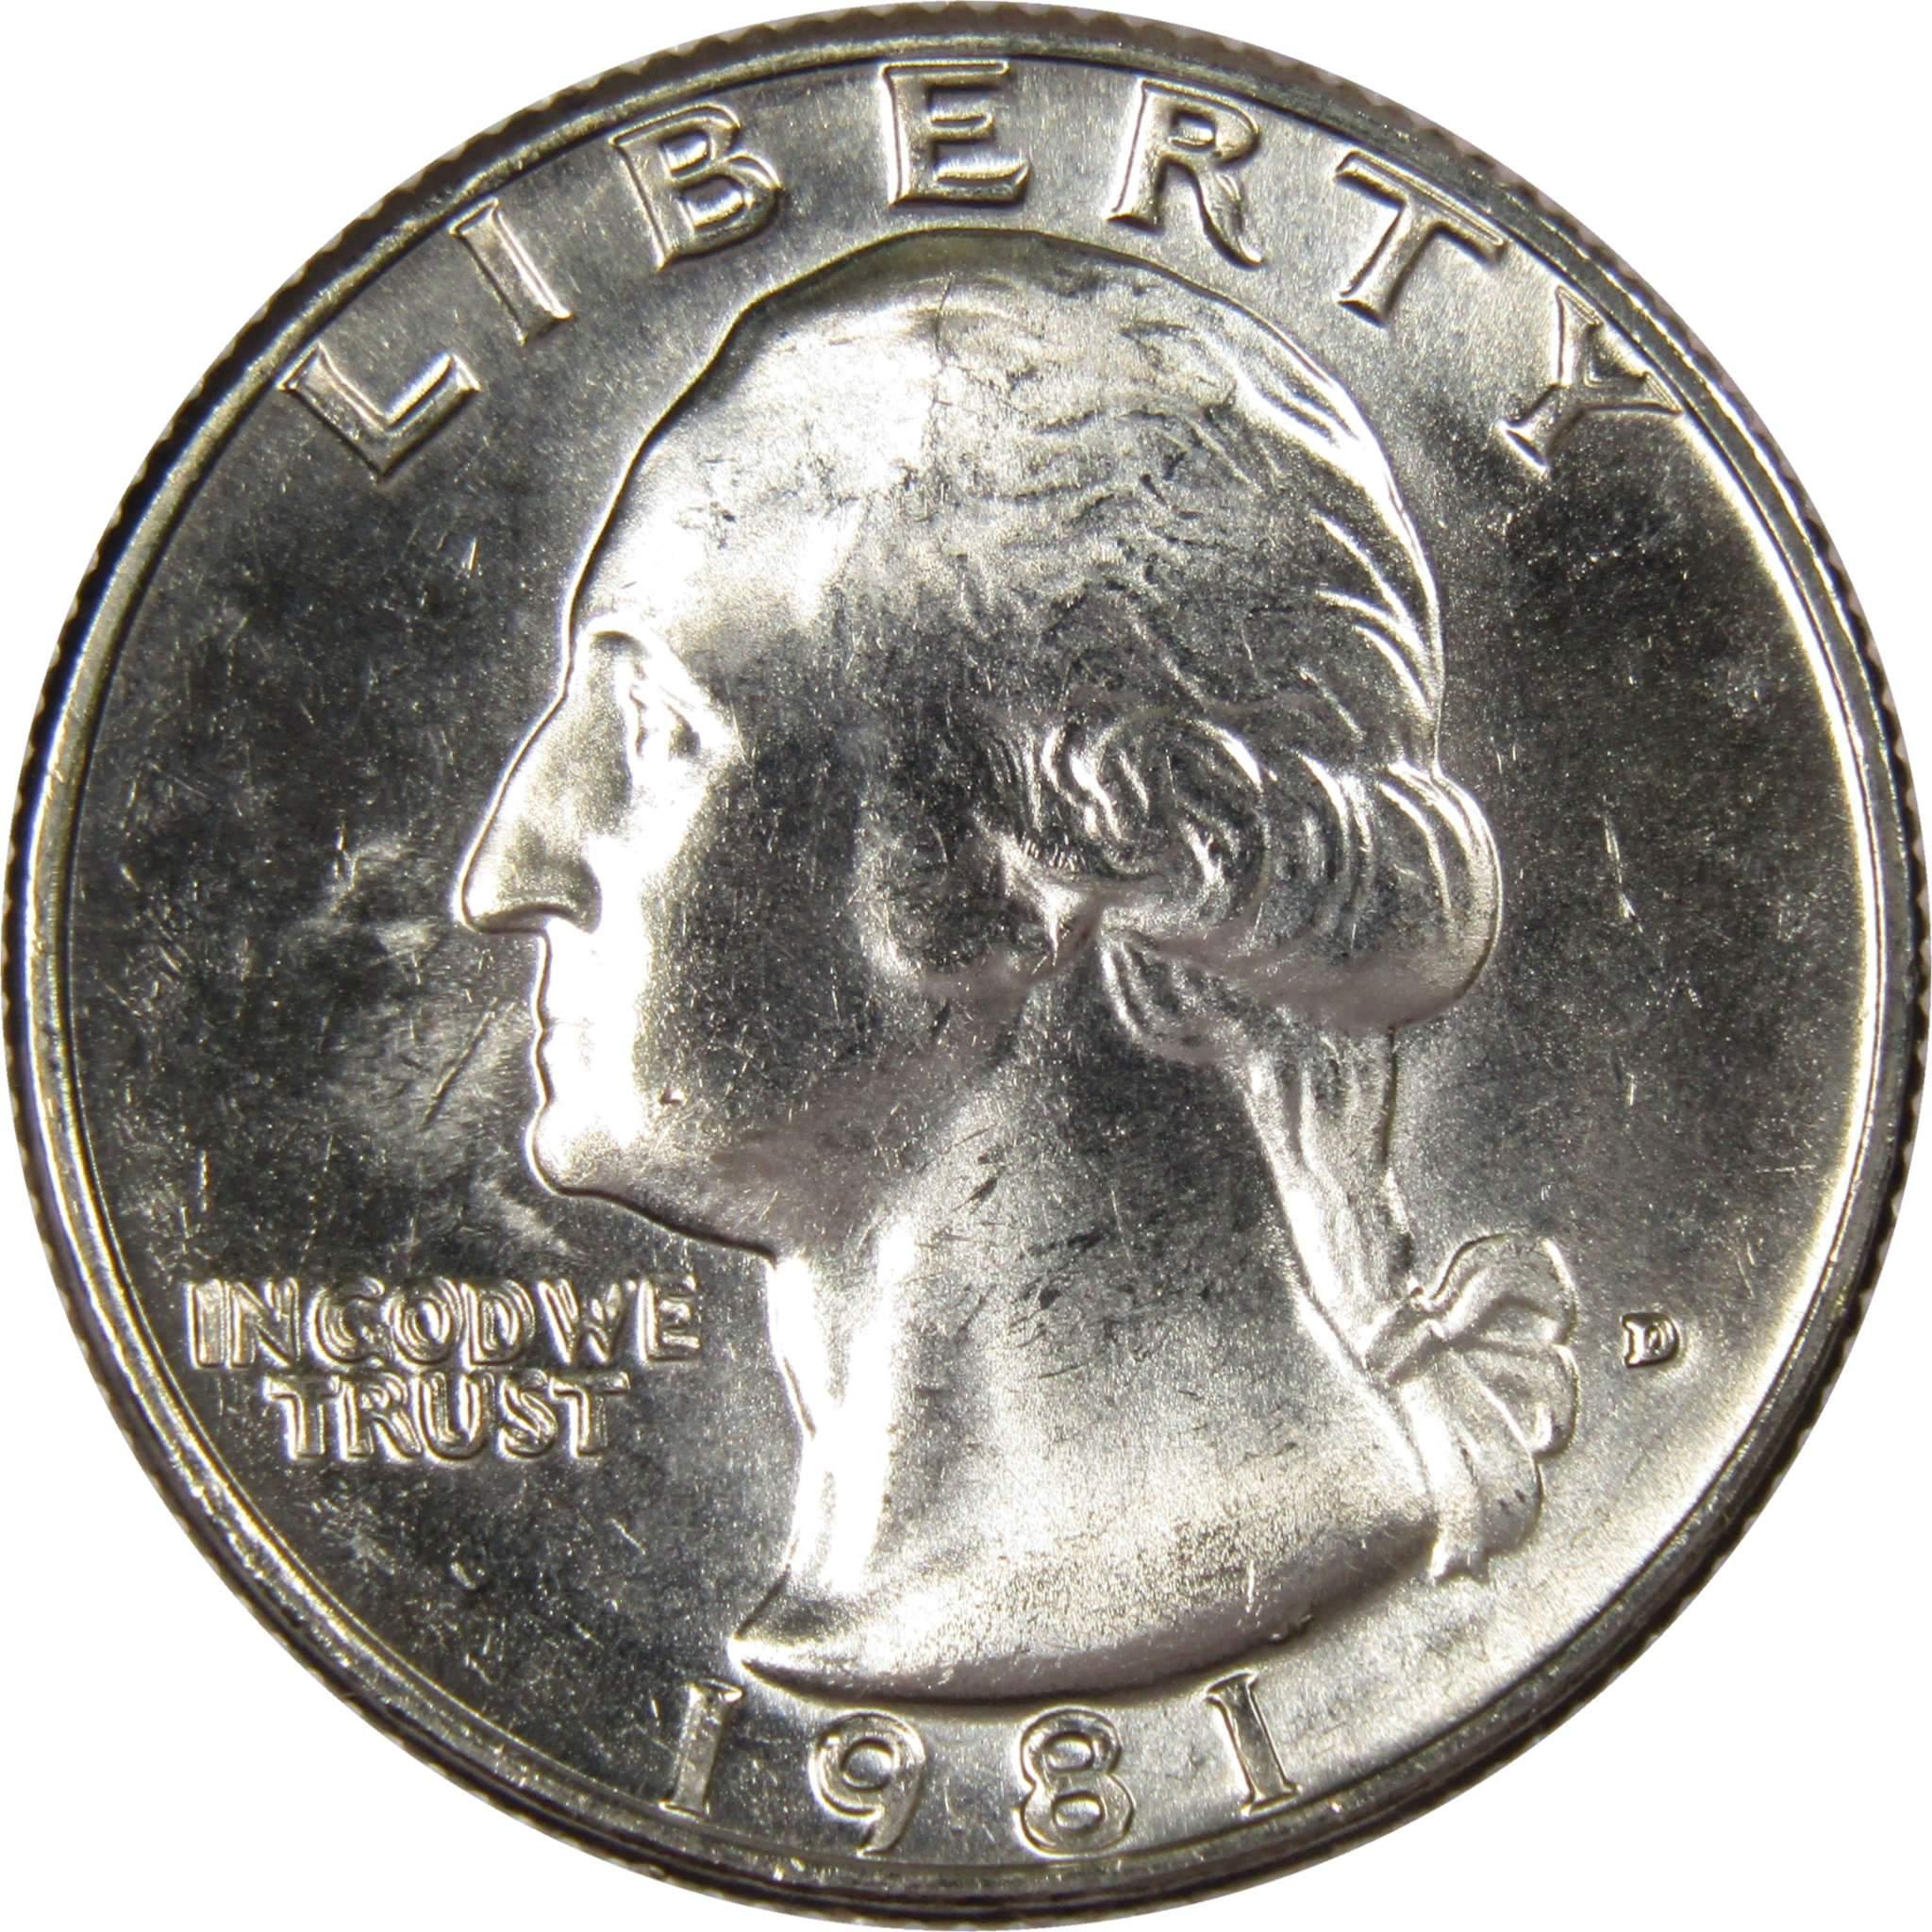 1981 D Washington Quarter BU Uncirculated Mint State 25c US Coin Collectible